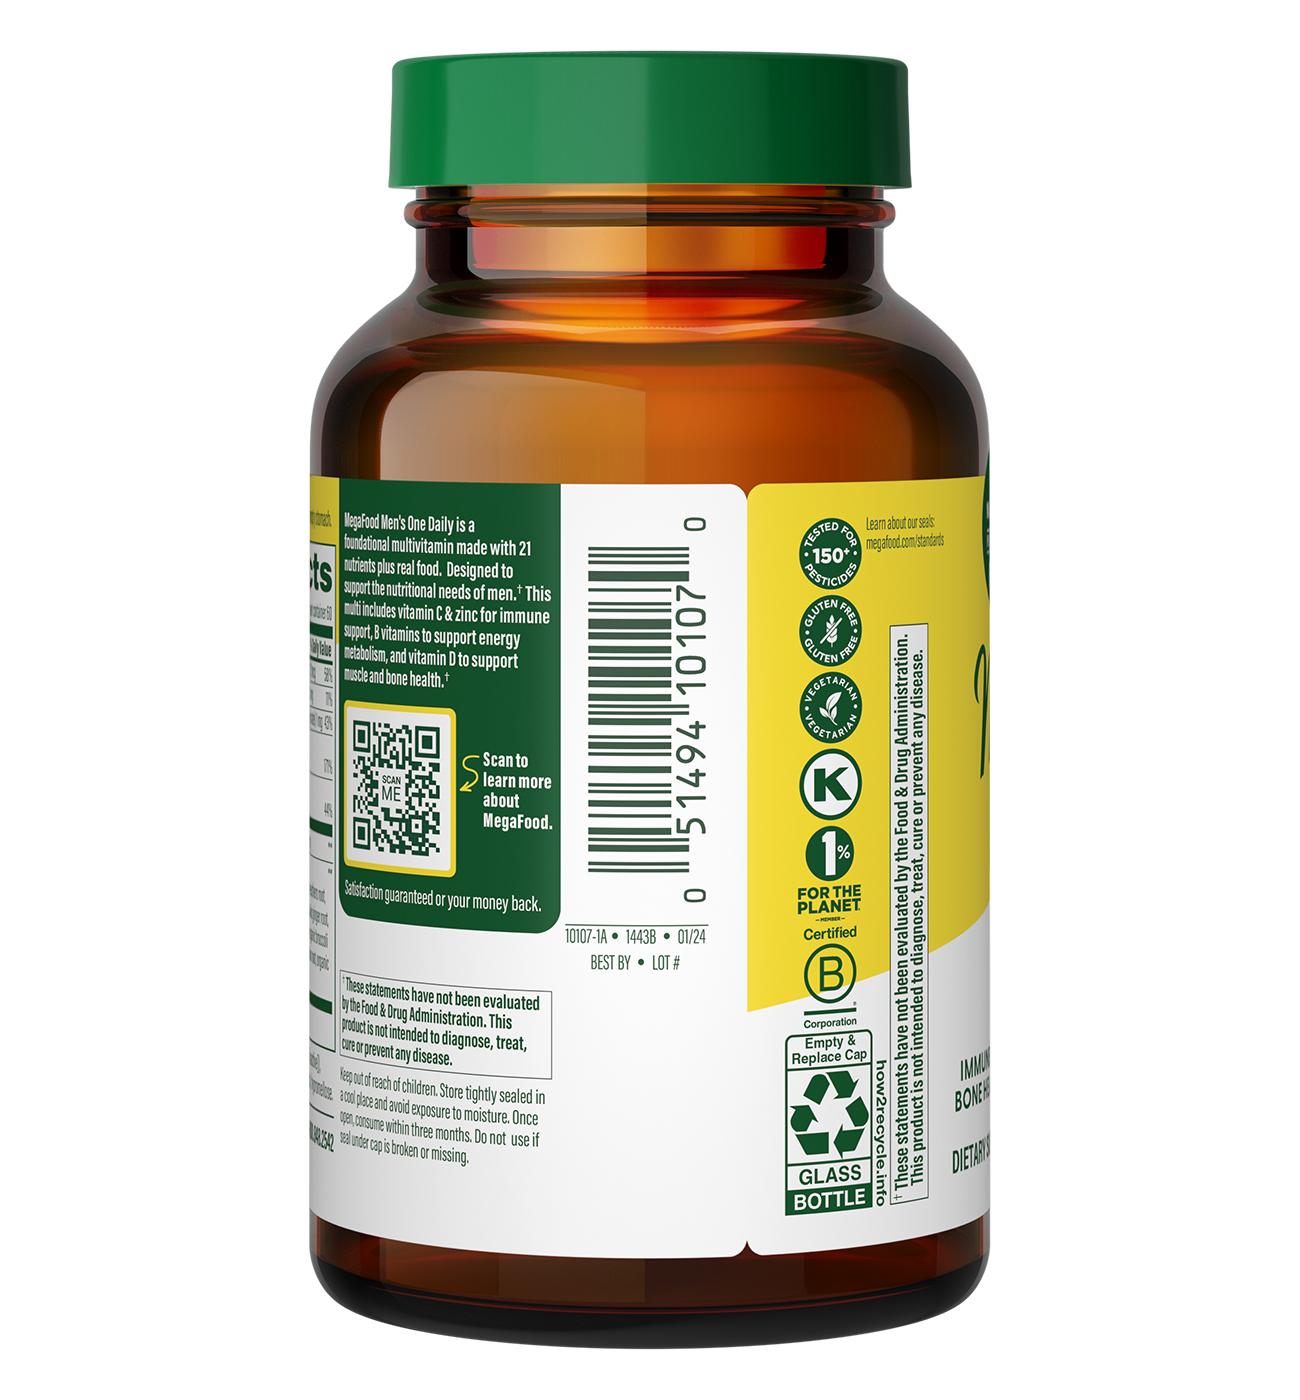 MegaFood Mens One Daily Multivitamin; image 2 of 3